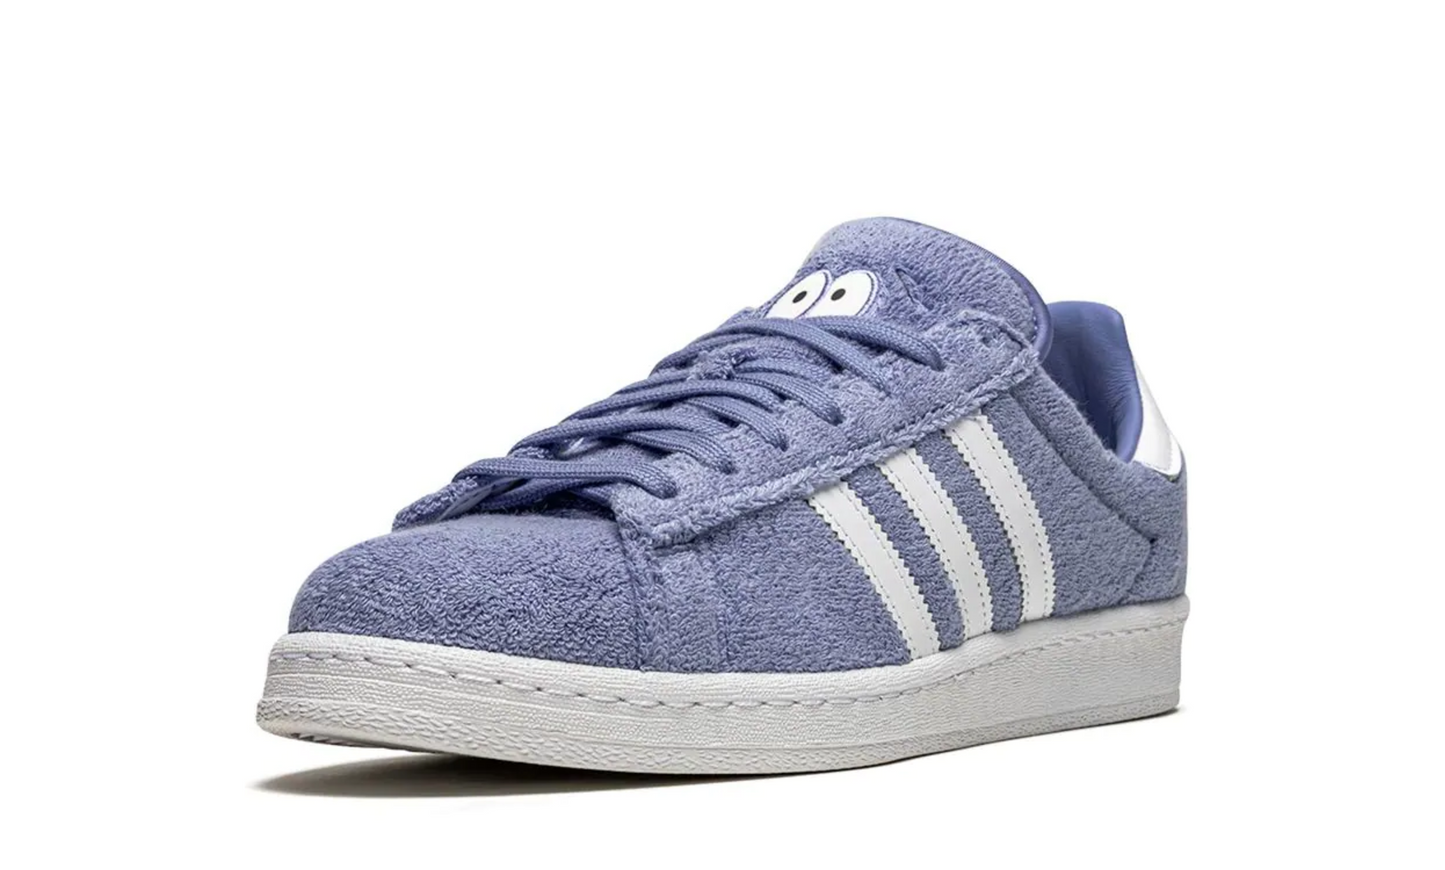 Adidas Campus 80s South Park Towelie – Spicysneakers